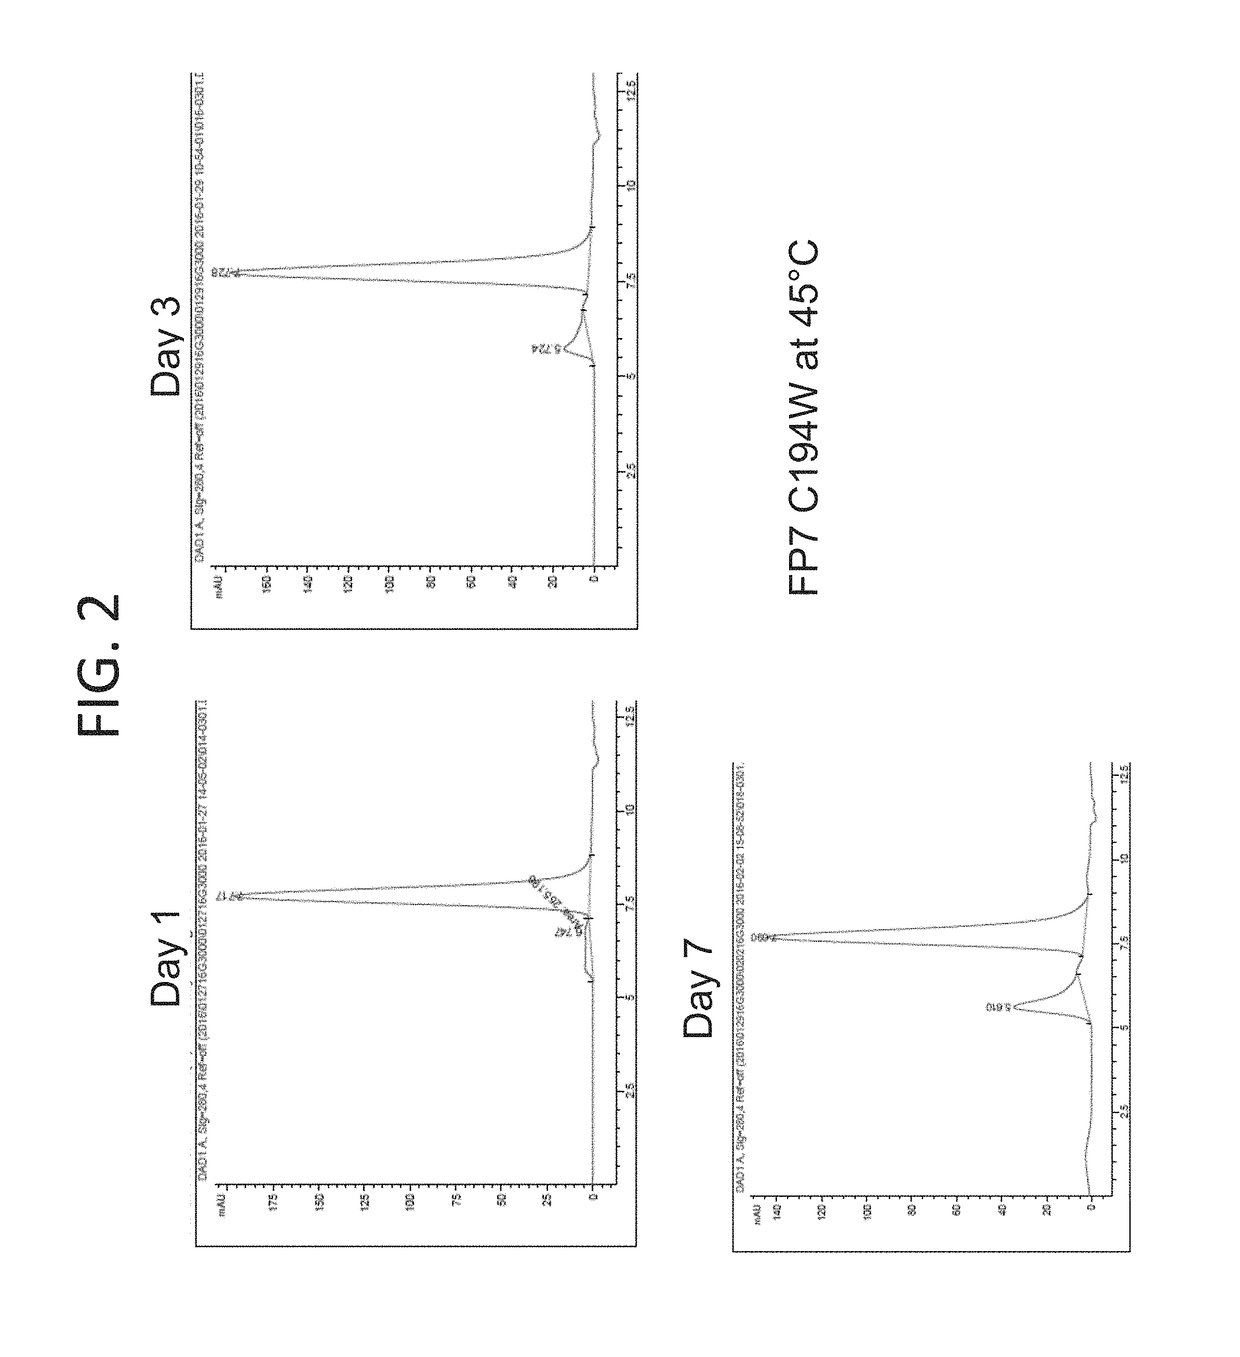 CD40L-Fc Fusion Polypeptides And Methods Of Use Thereof